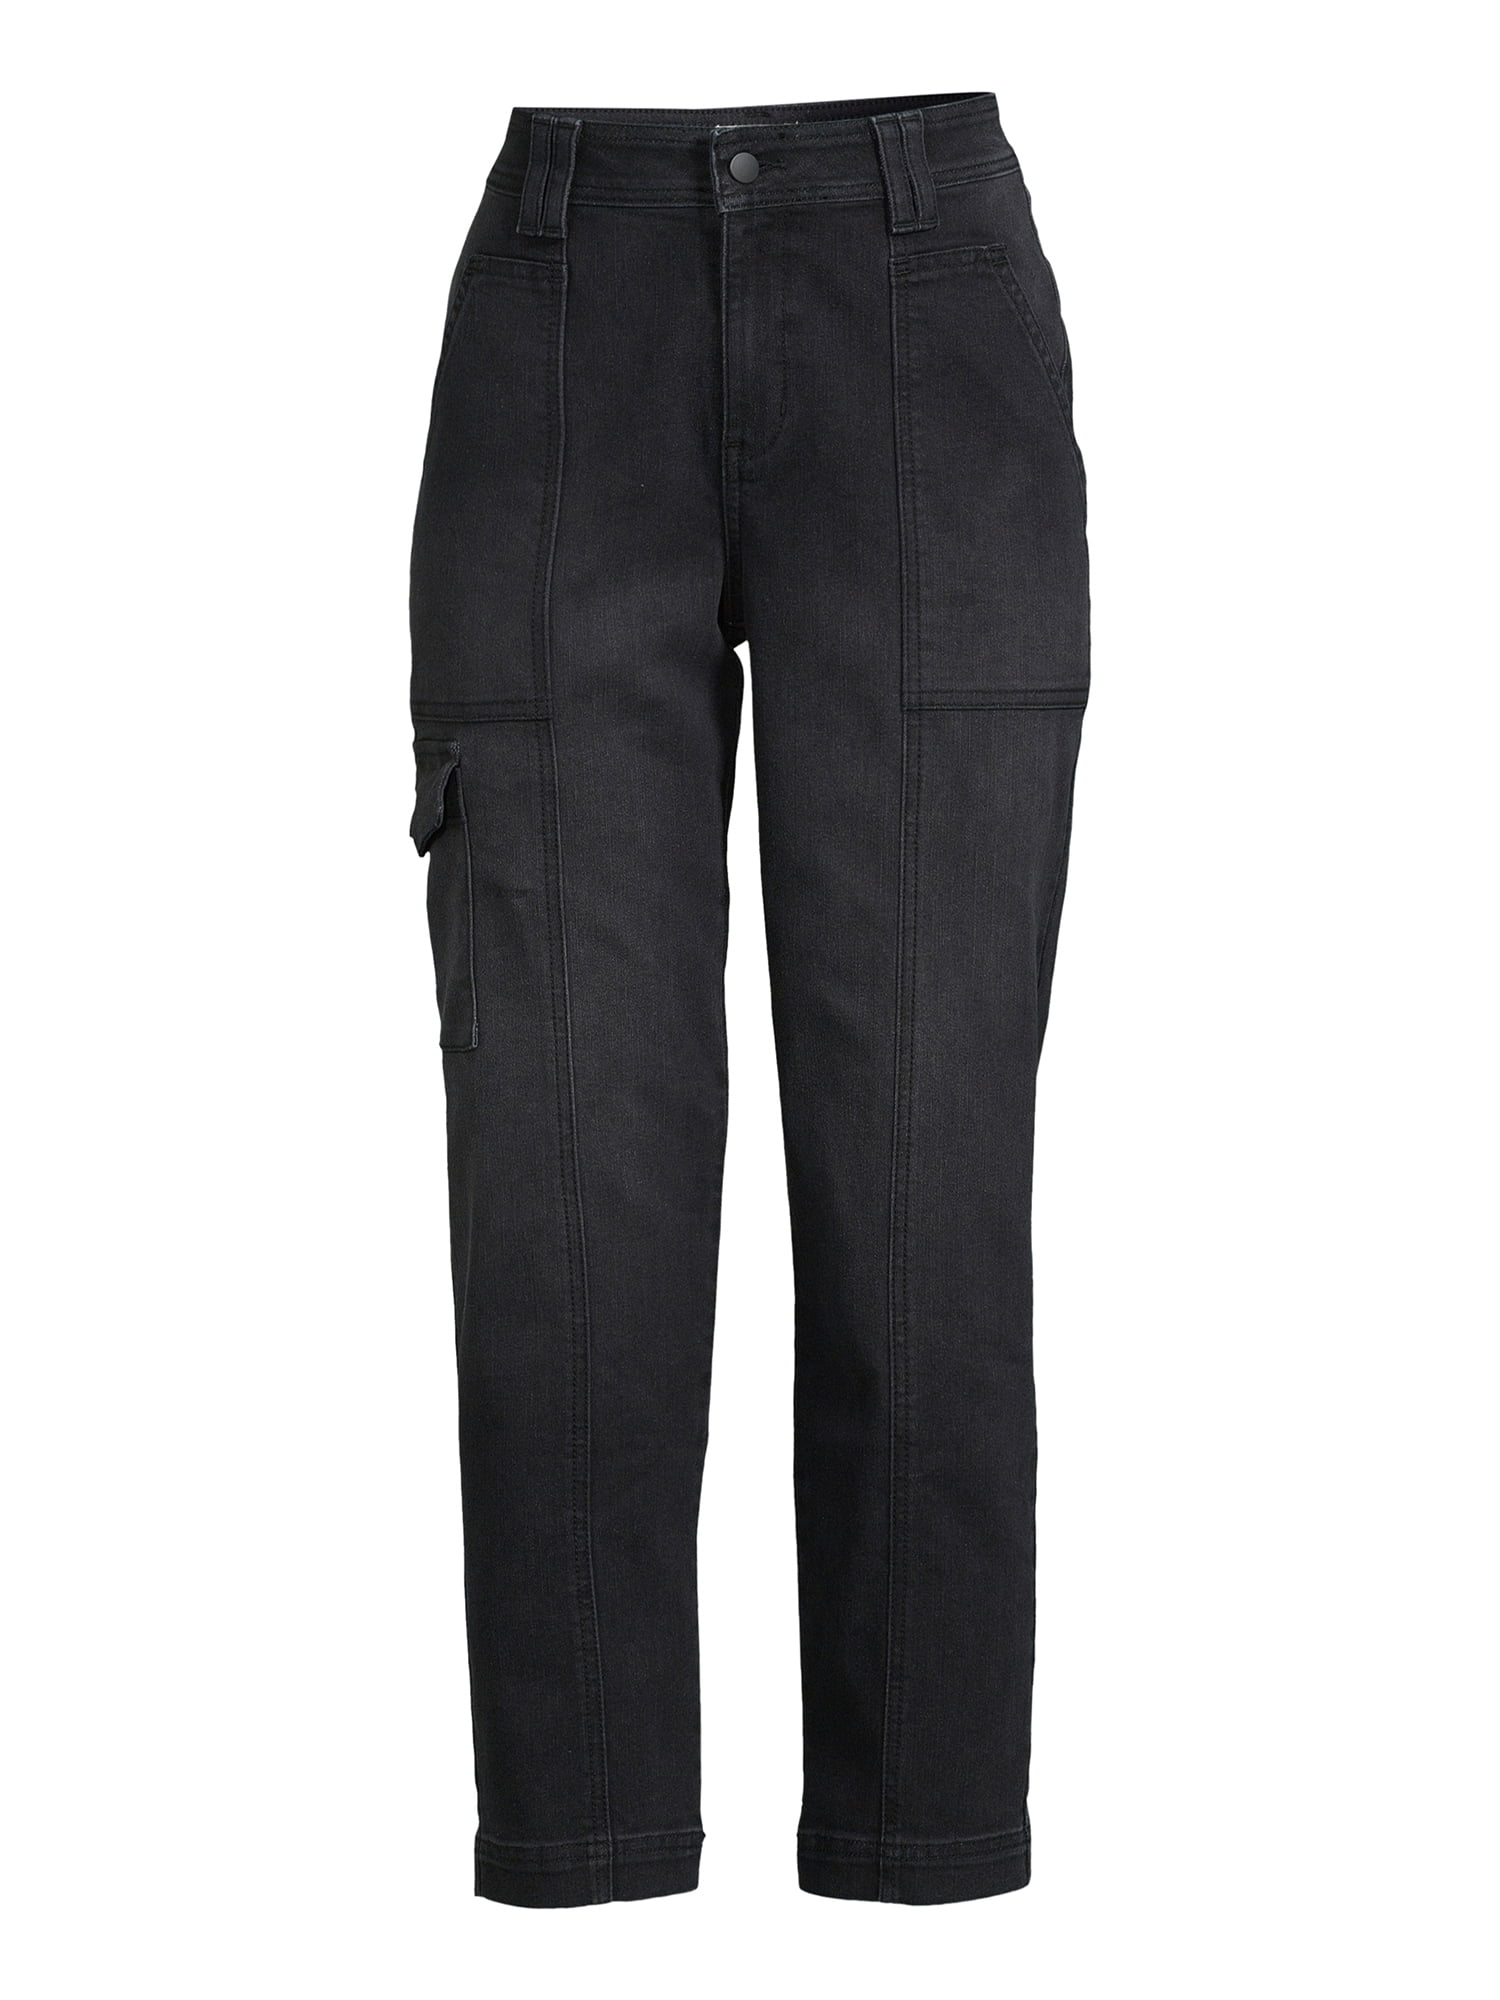 Time & Tru ladies walk pants 12-14 Size undefined - $24 - From